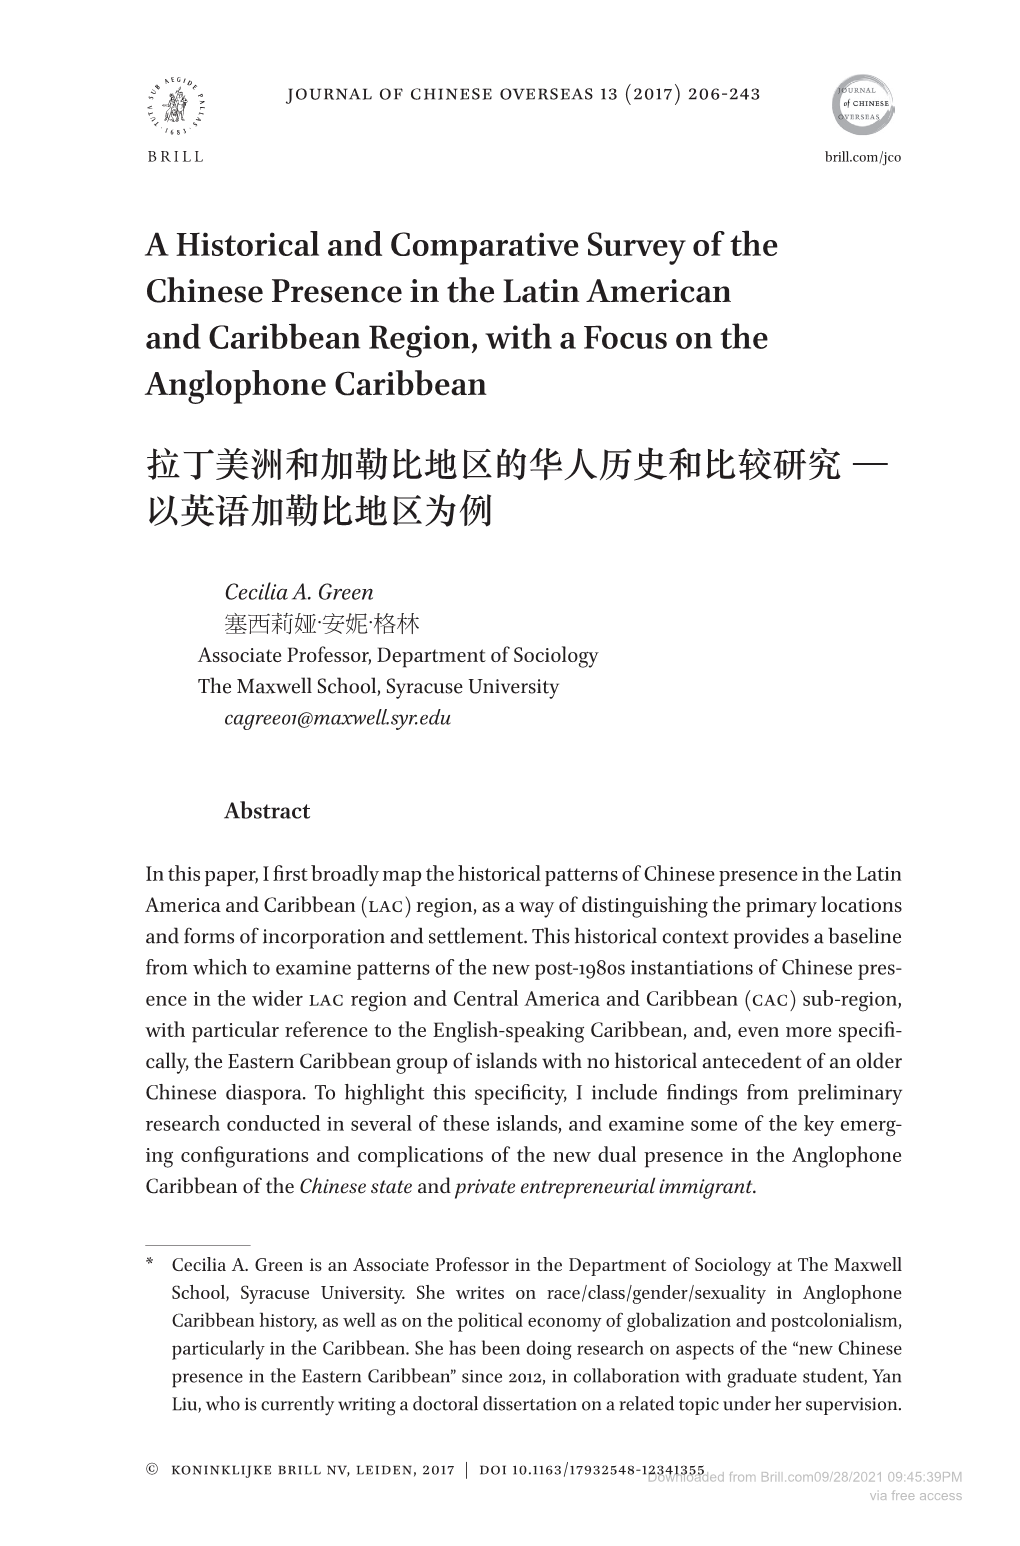 A Historical and Comparative Survey of the Chinese Presence in the Latin American and Caribbean Region, with a Focus on the Anglophone Caribbean